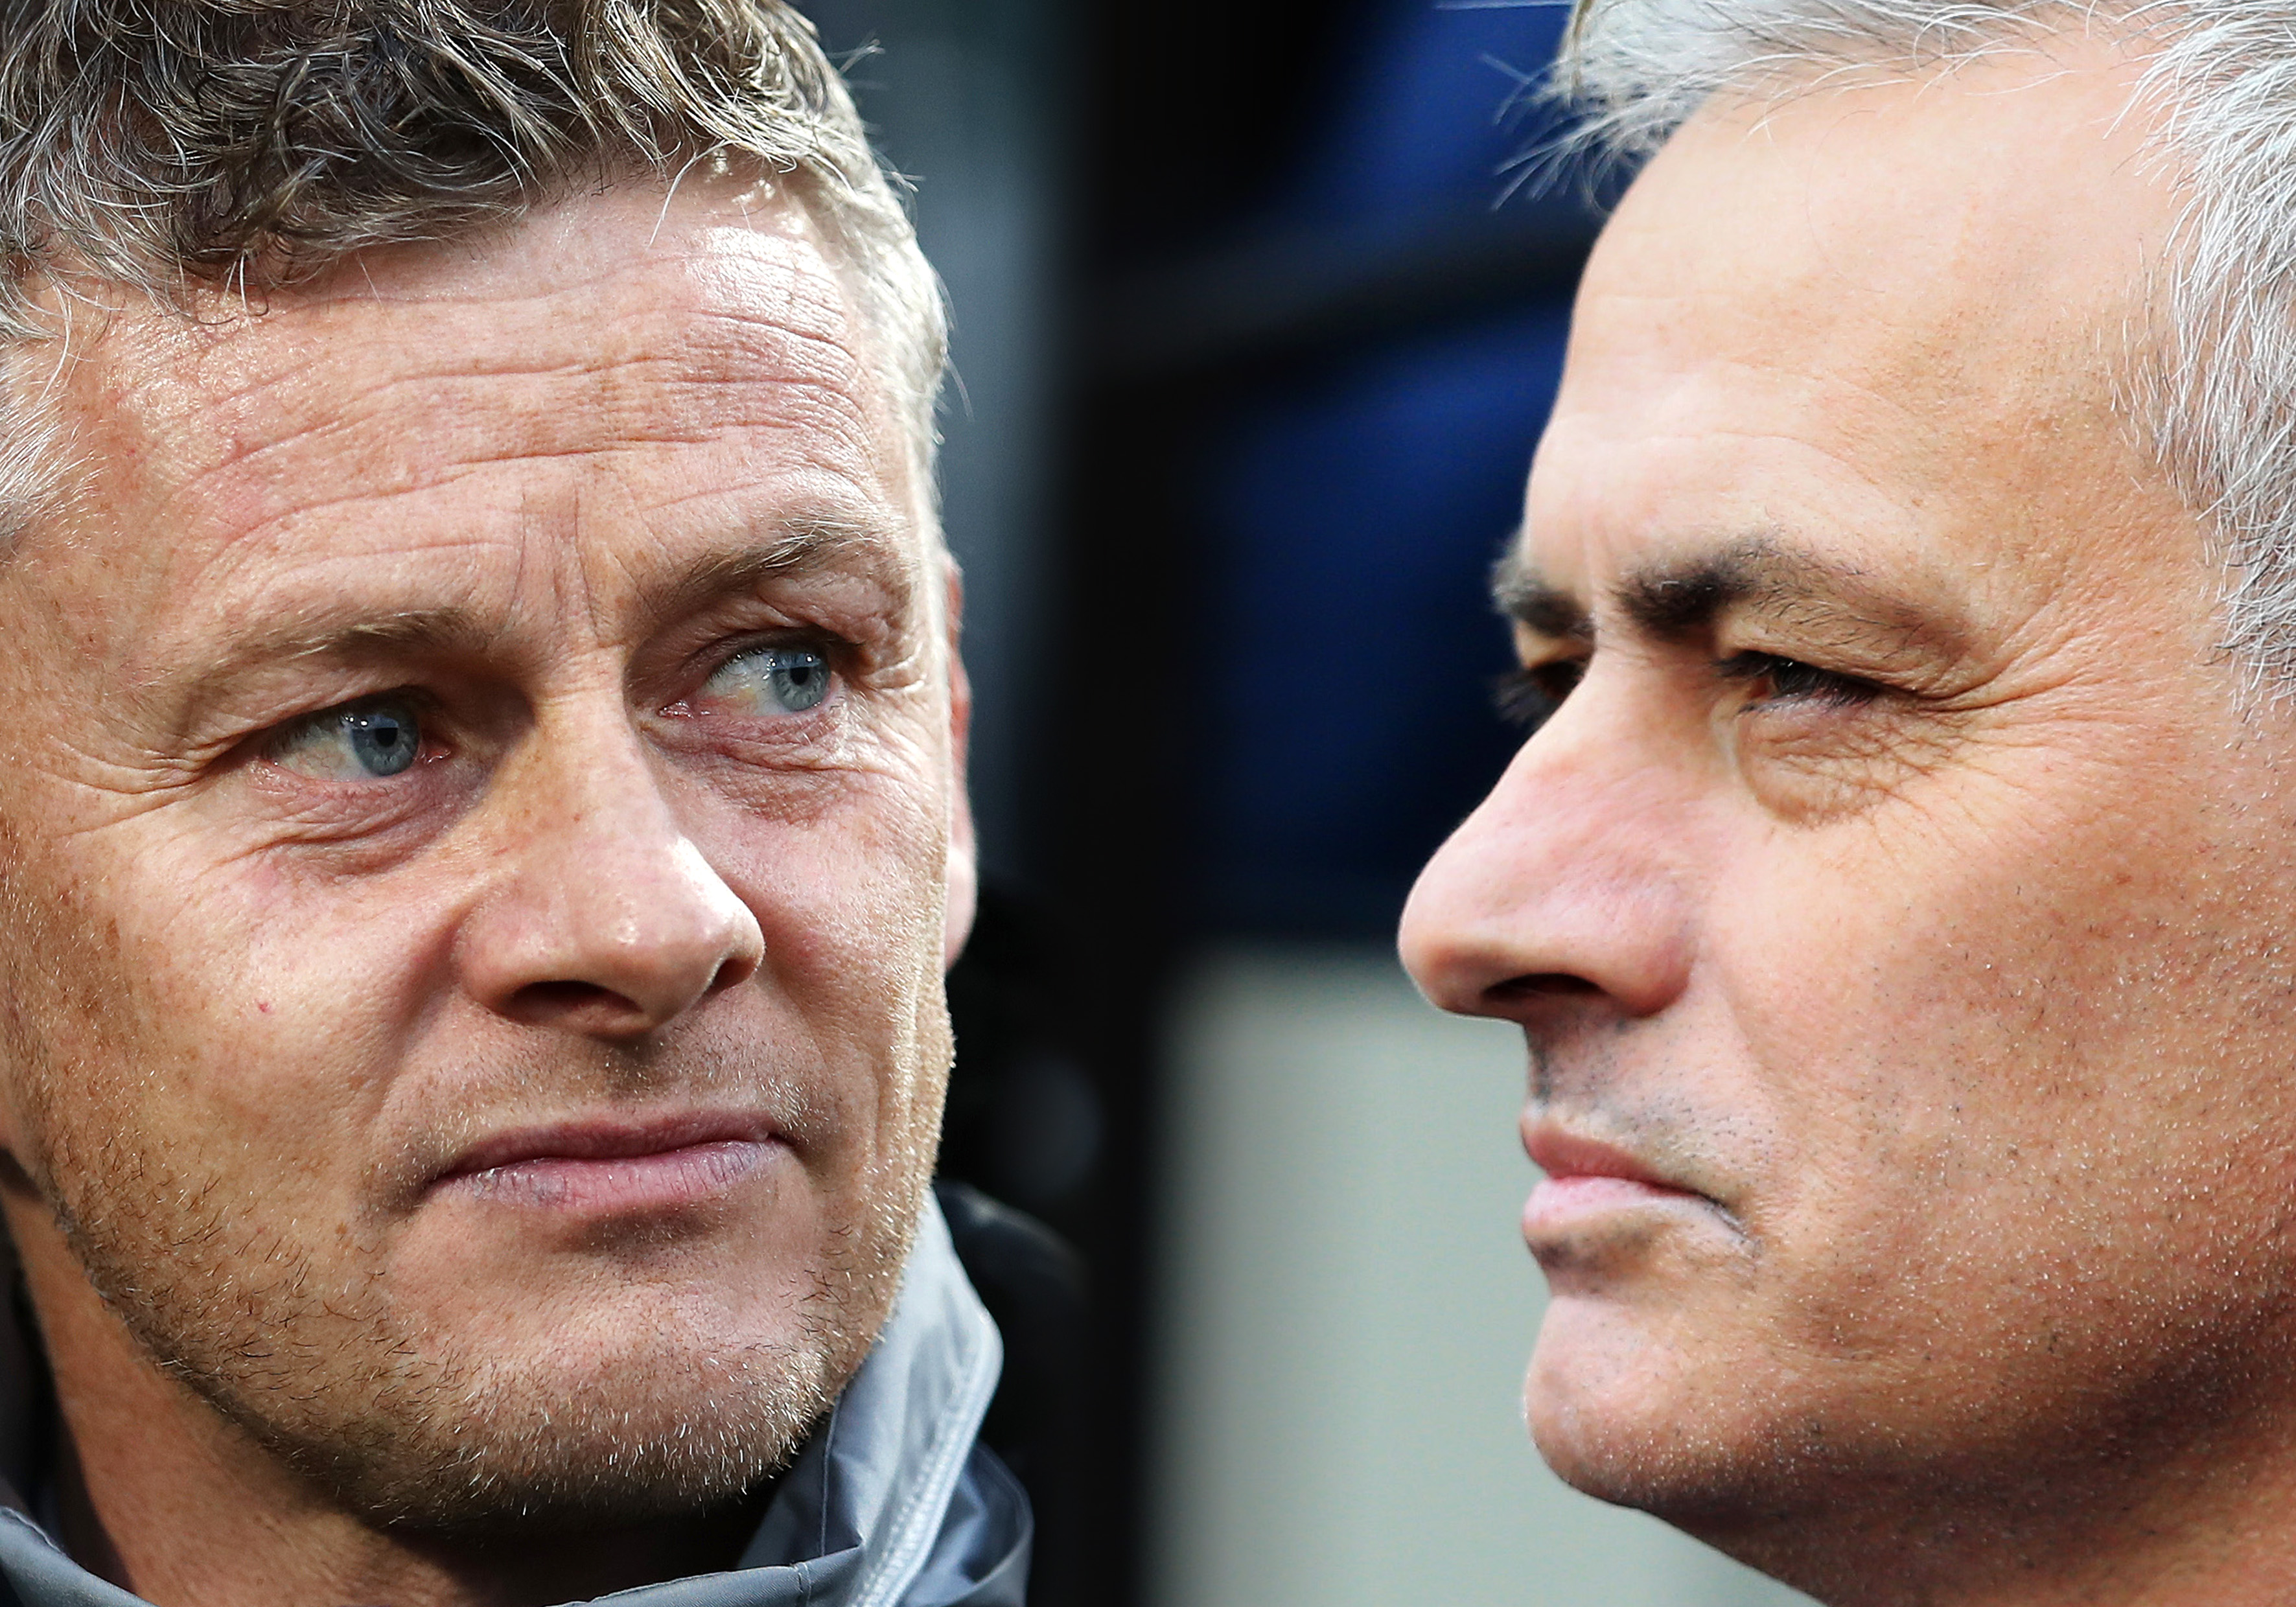 Mourinho about to get Ole'd again? (Picture Courtesy - AFP/Getty Images)